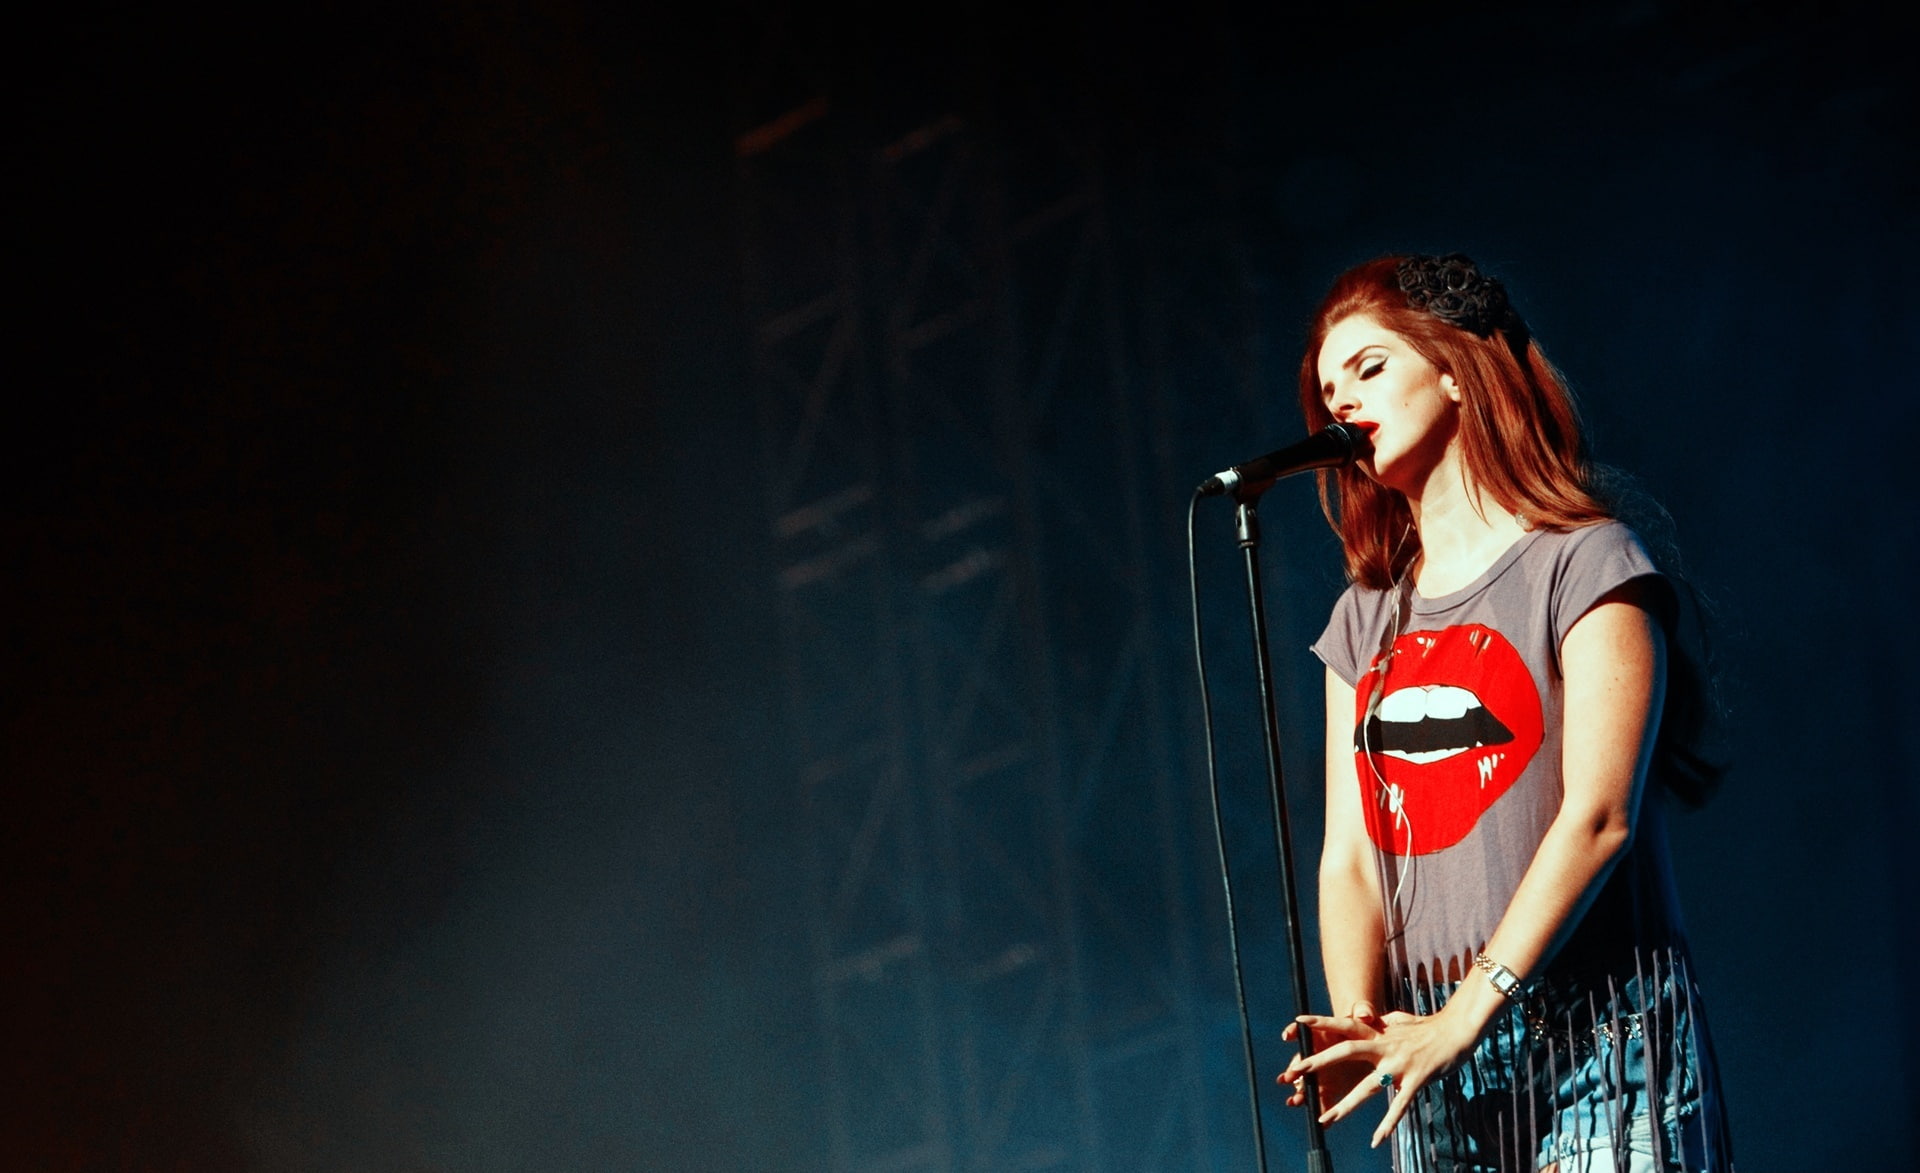 Lana Del Rey, Music, Others, Beautiful, Concert, Singing